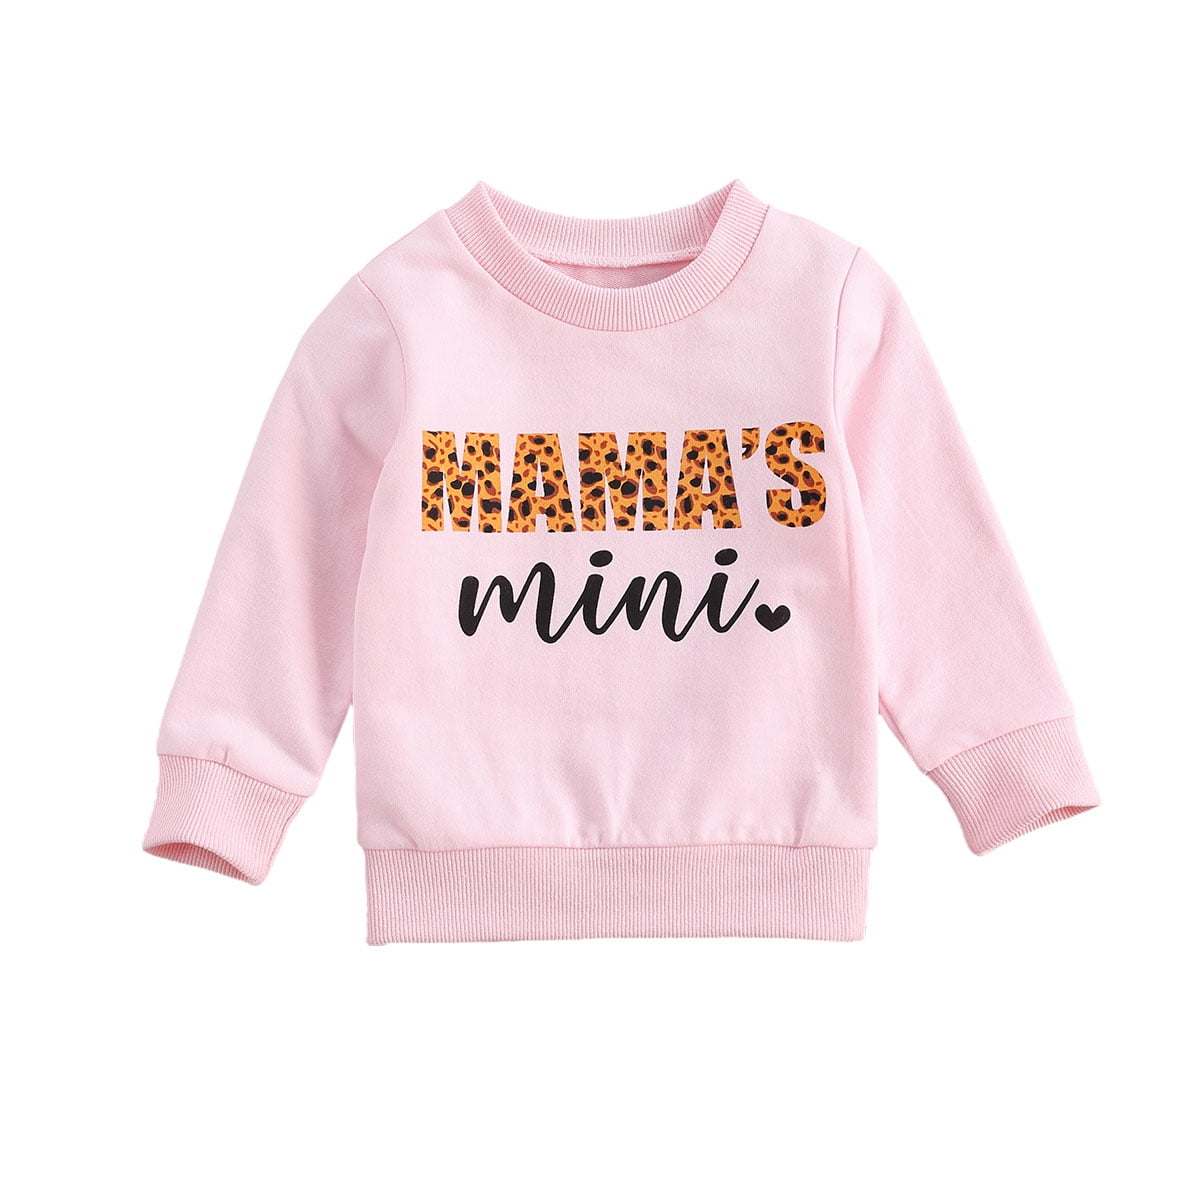 Toddler Kids Baby Girl Long Sleeve T-shirt Tops Autumn Winter Blouse Pullovers 